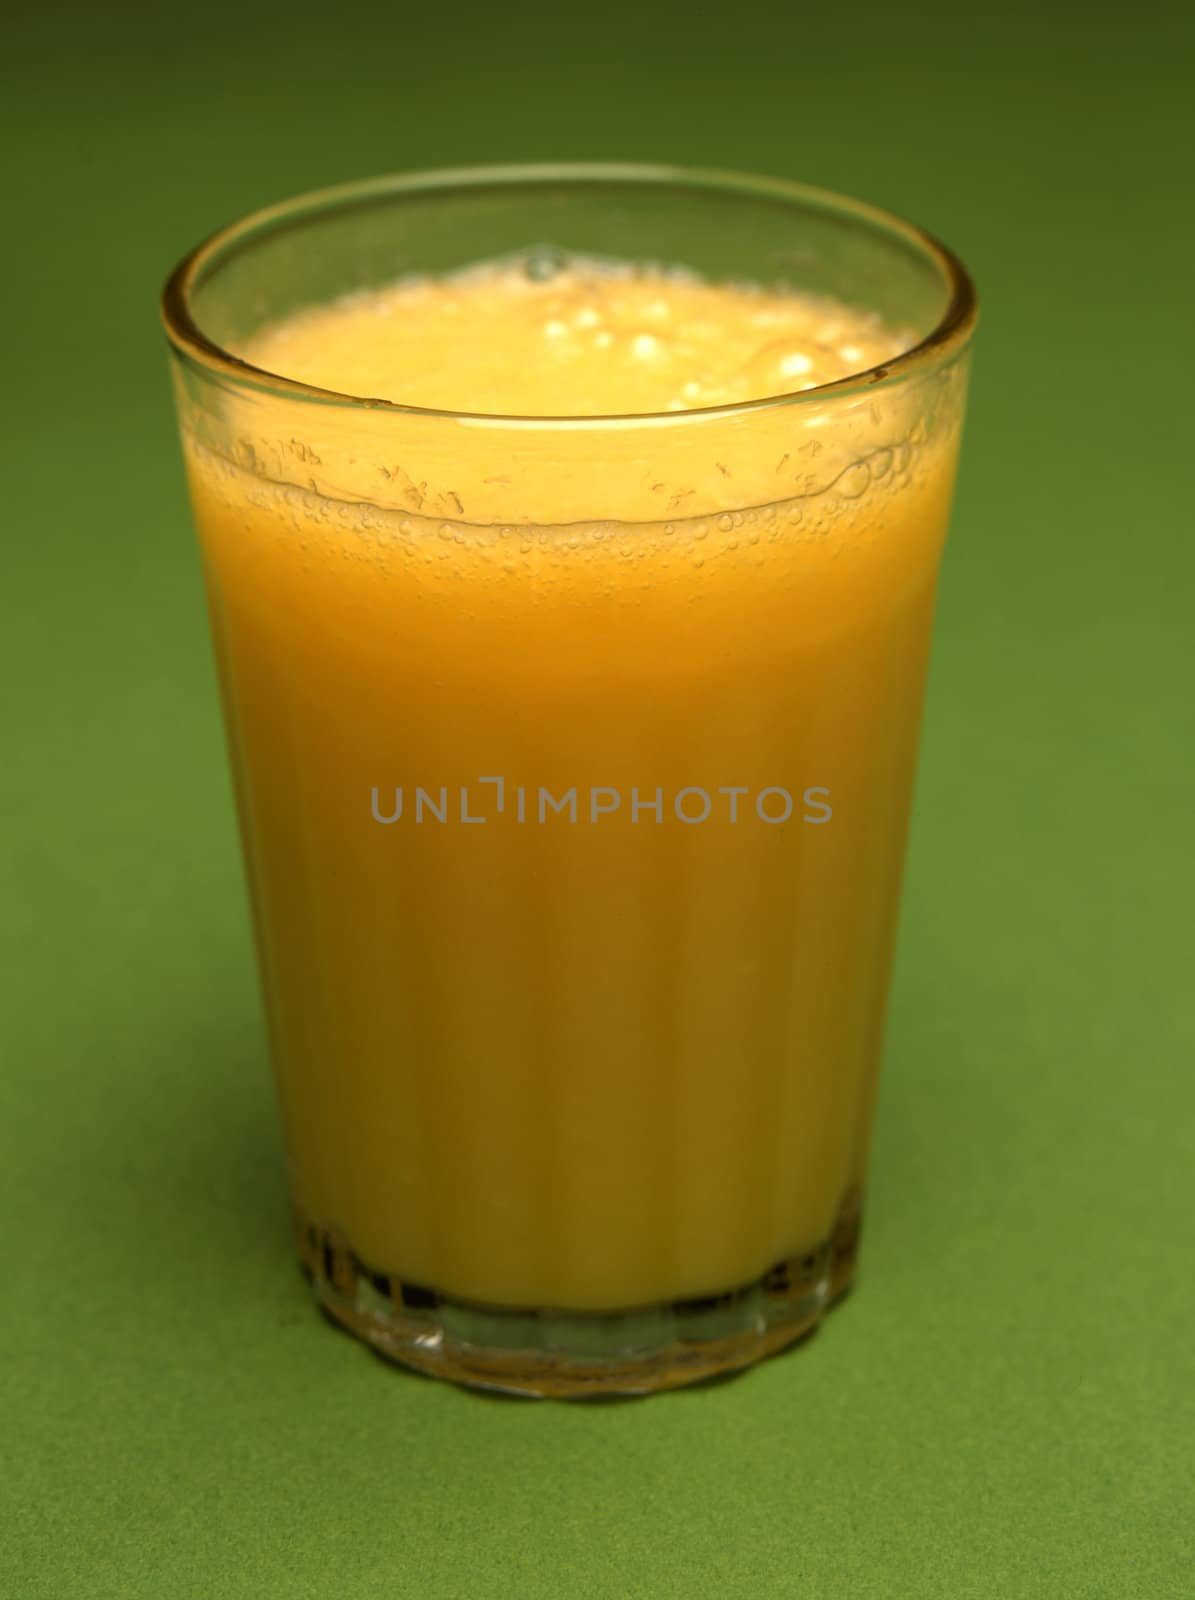 A glass of orange juice on green background
